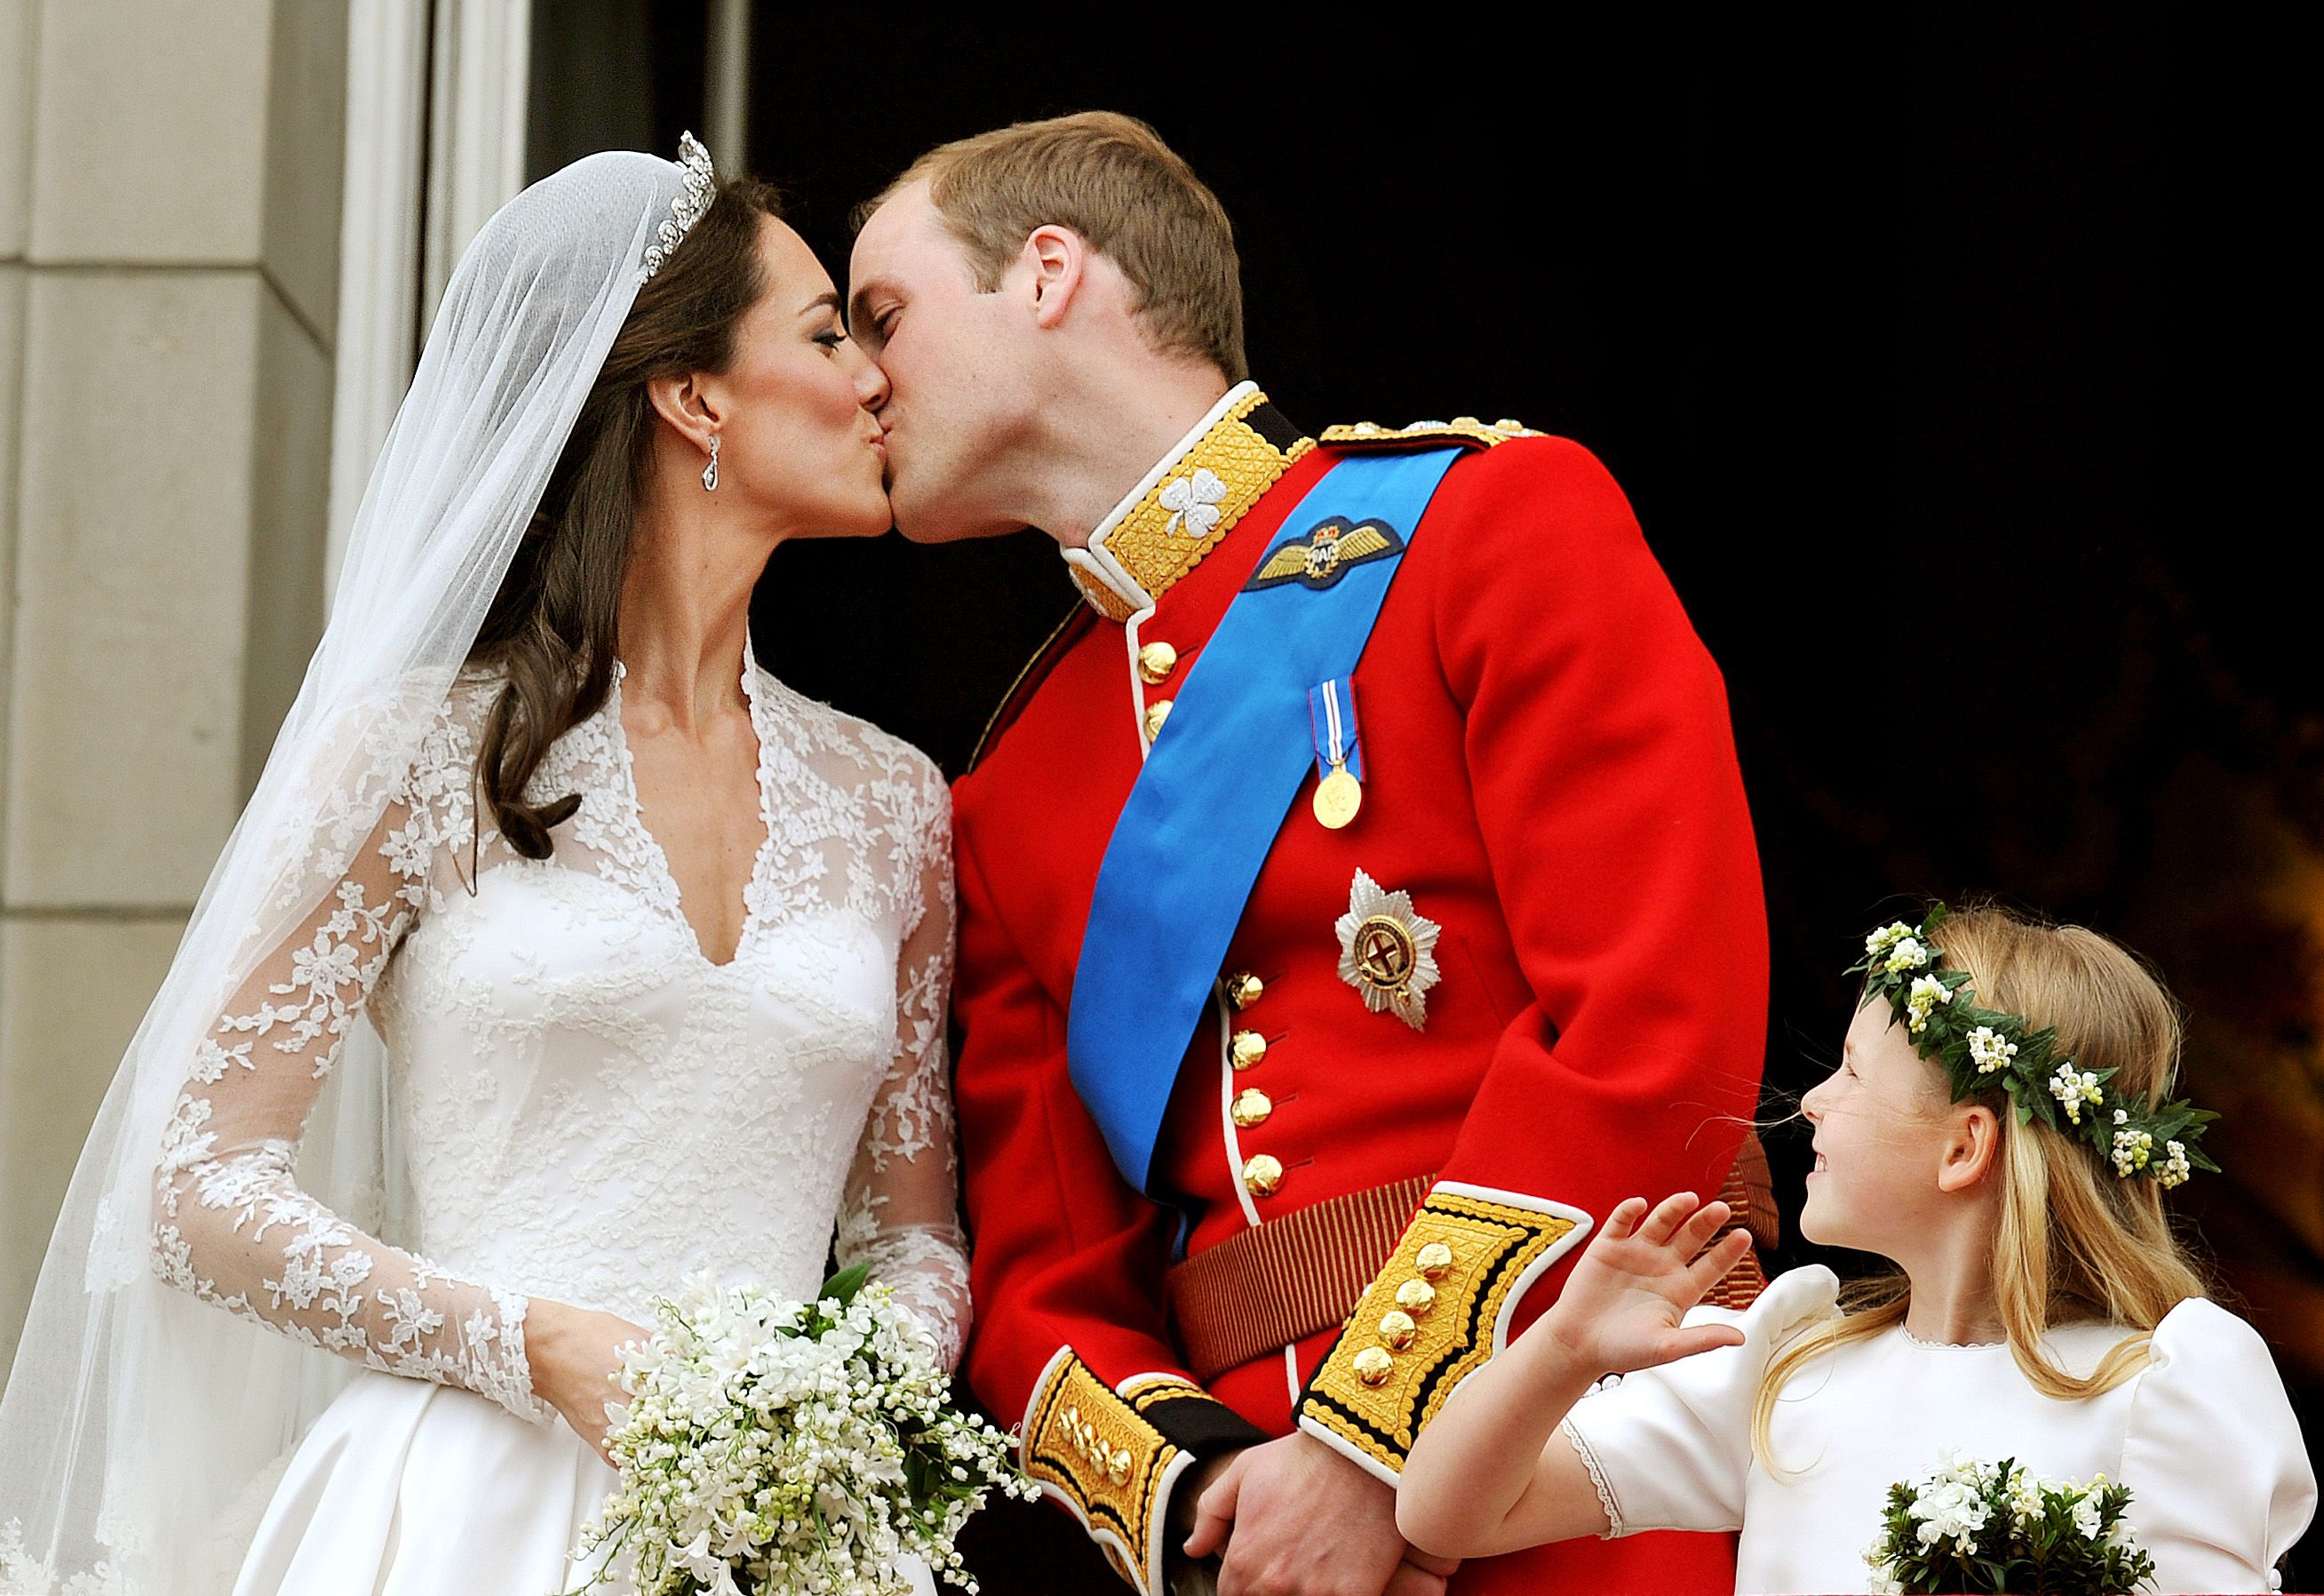 Duchess Kate and Prince William kiss on the balcony of Buckingham Palace after getting married on April 29, 2011, in London, England | Photo: John Stillwell - WPA/Getty Images